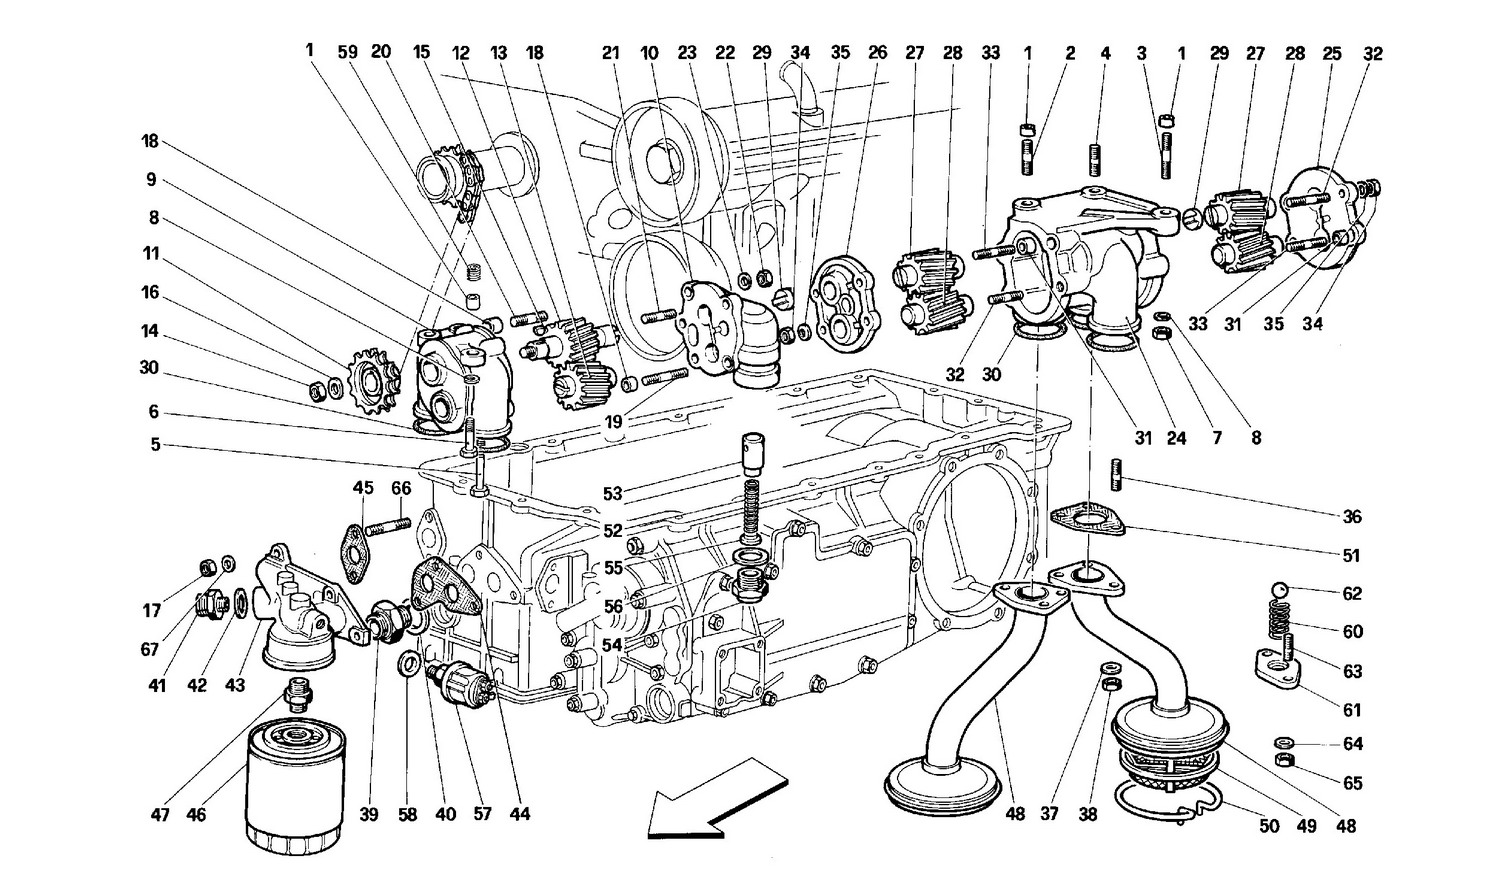 Schematic: Lubrication - Pumps And Oil Filter